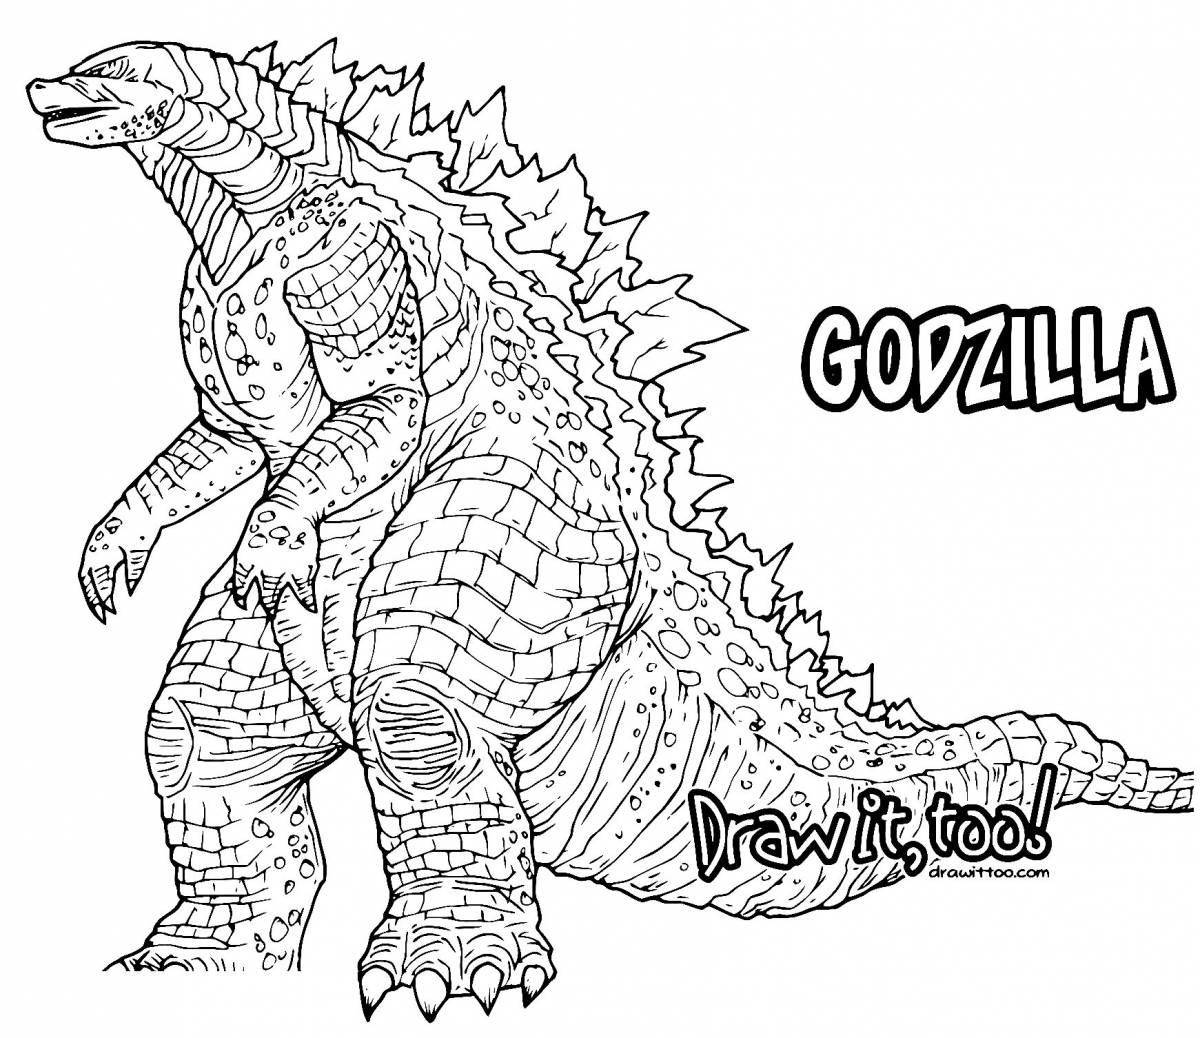 Great Godzilla coloring book for kids